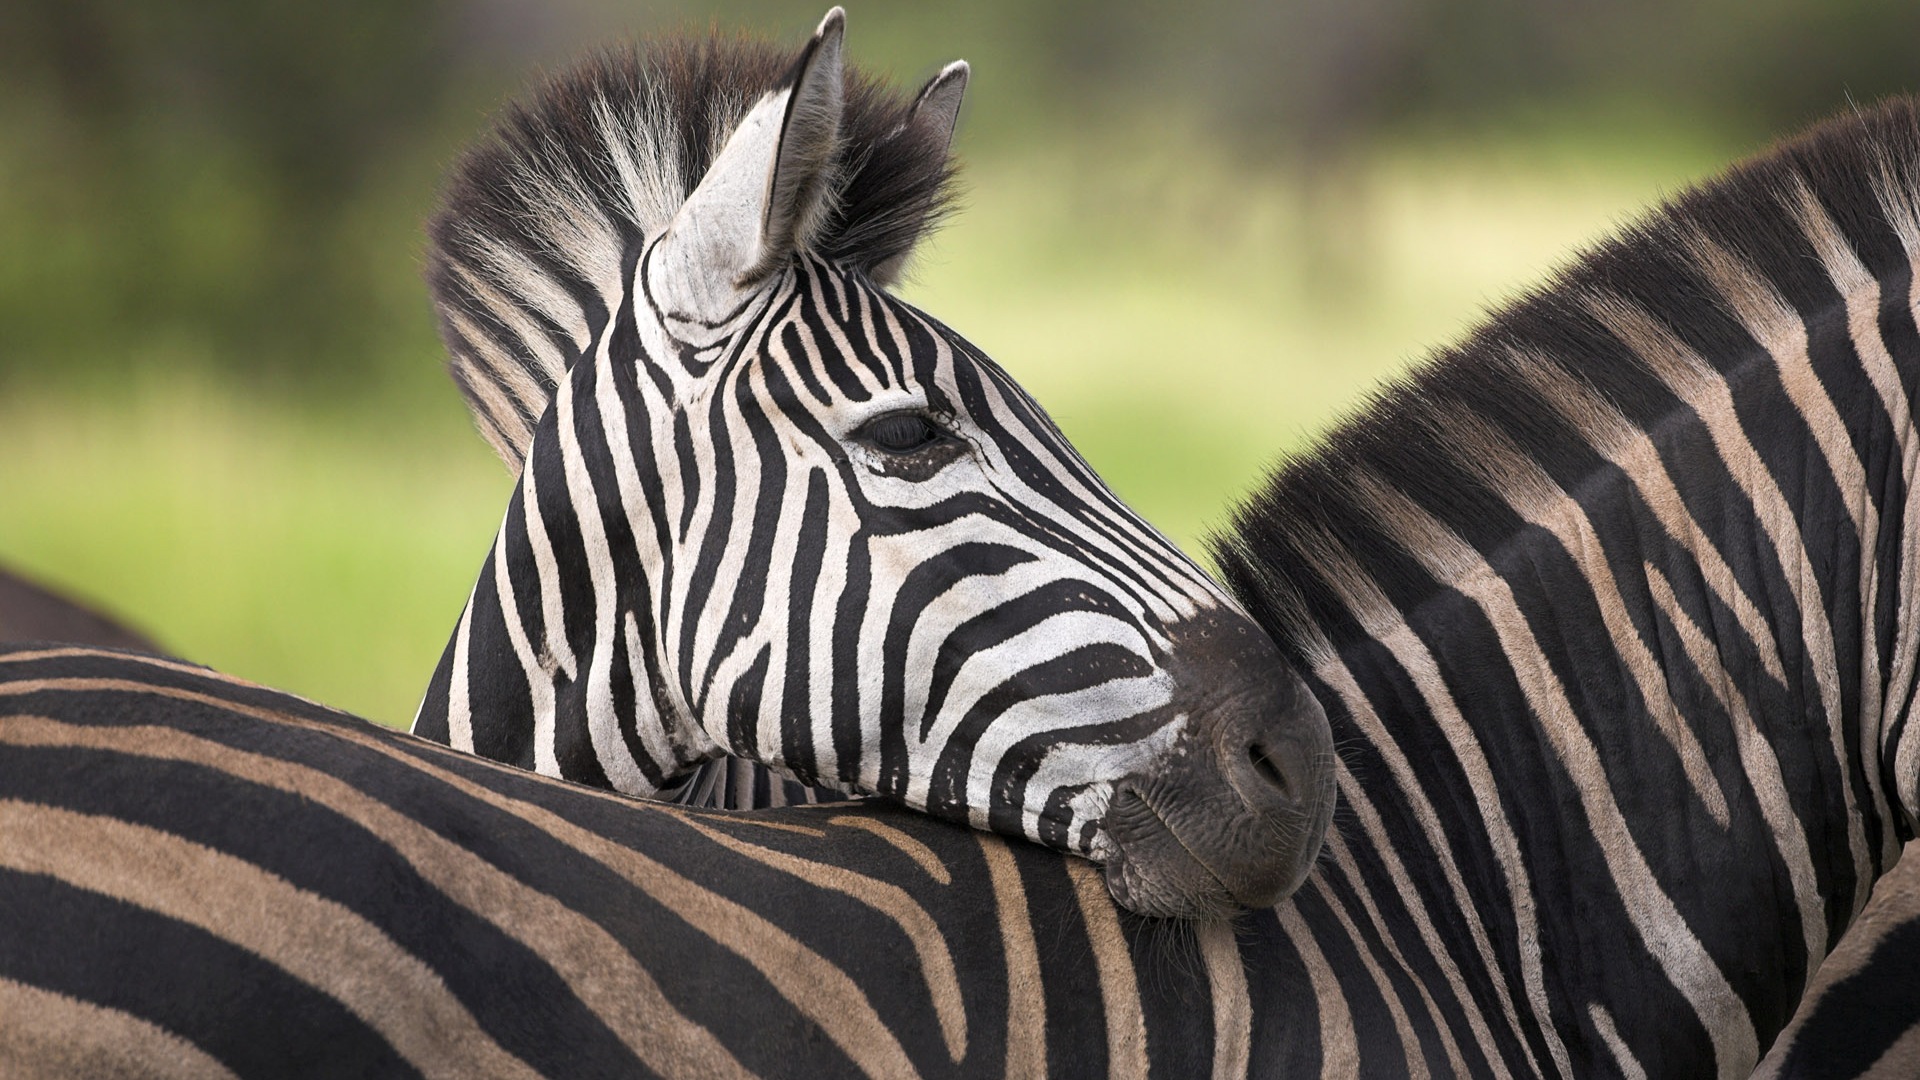 Black and white striped animal, zebra HD wallpapers #16 - 1920x1080